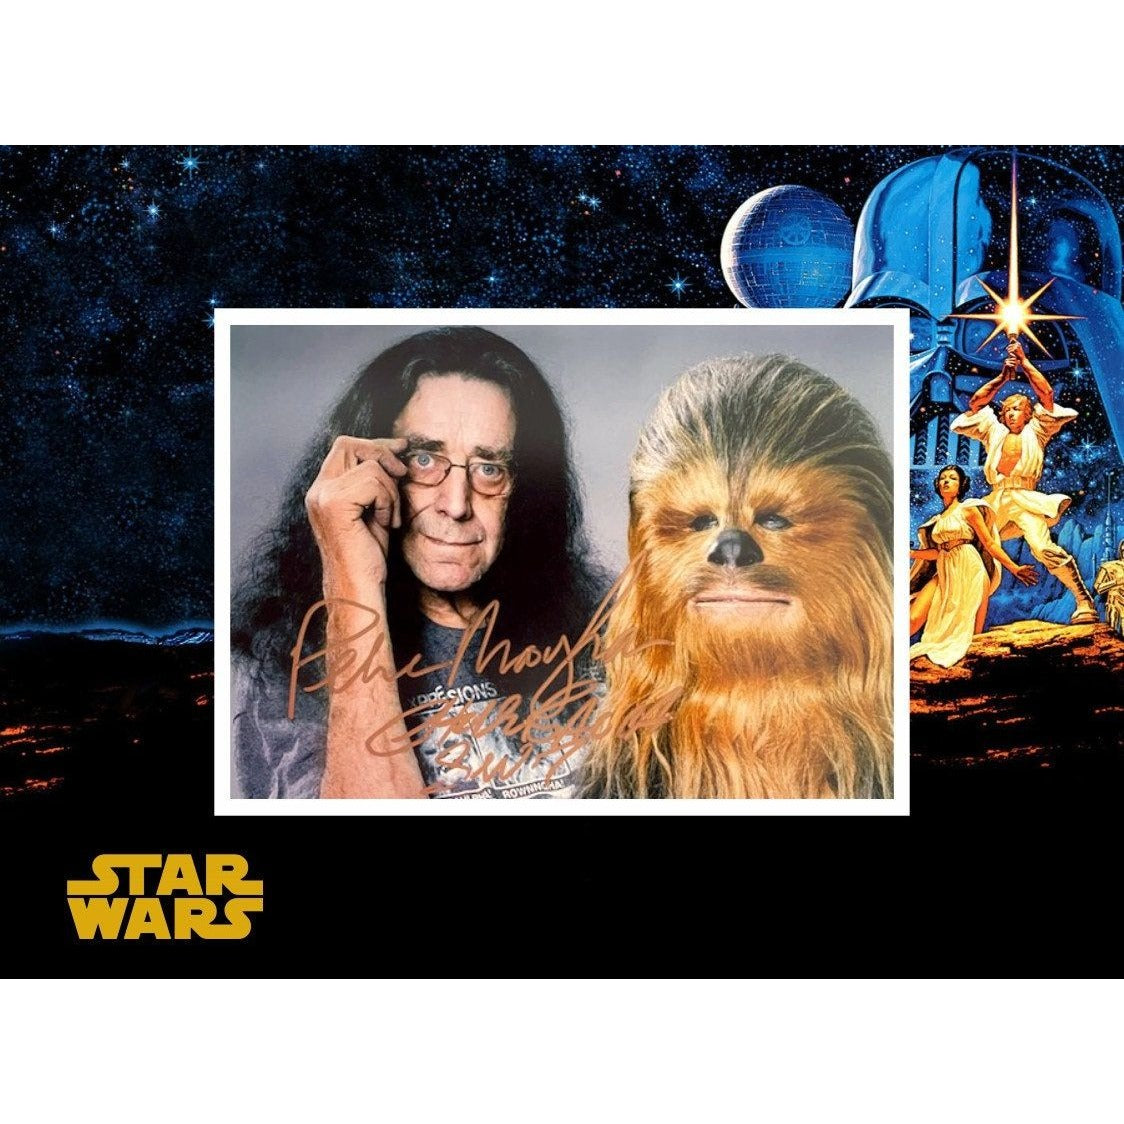 Peter Mayhew Chewbacca 5 x 7 photo signed with proof